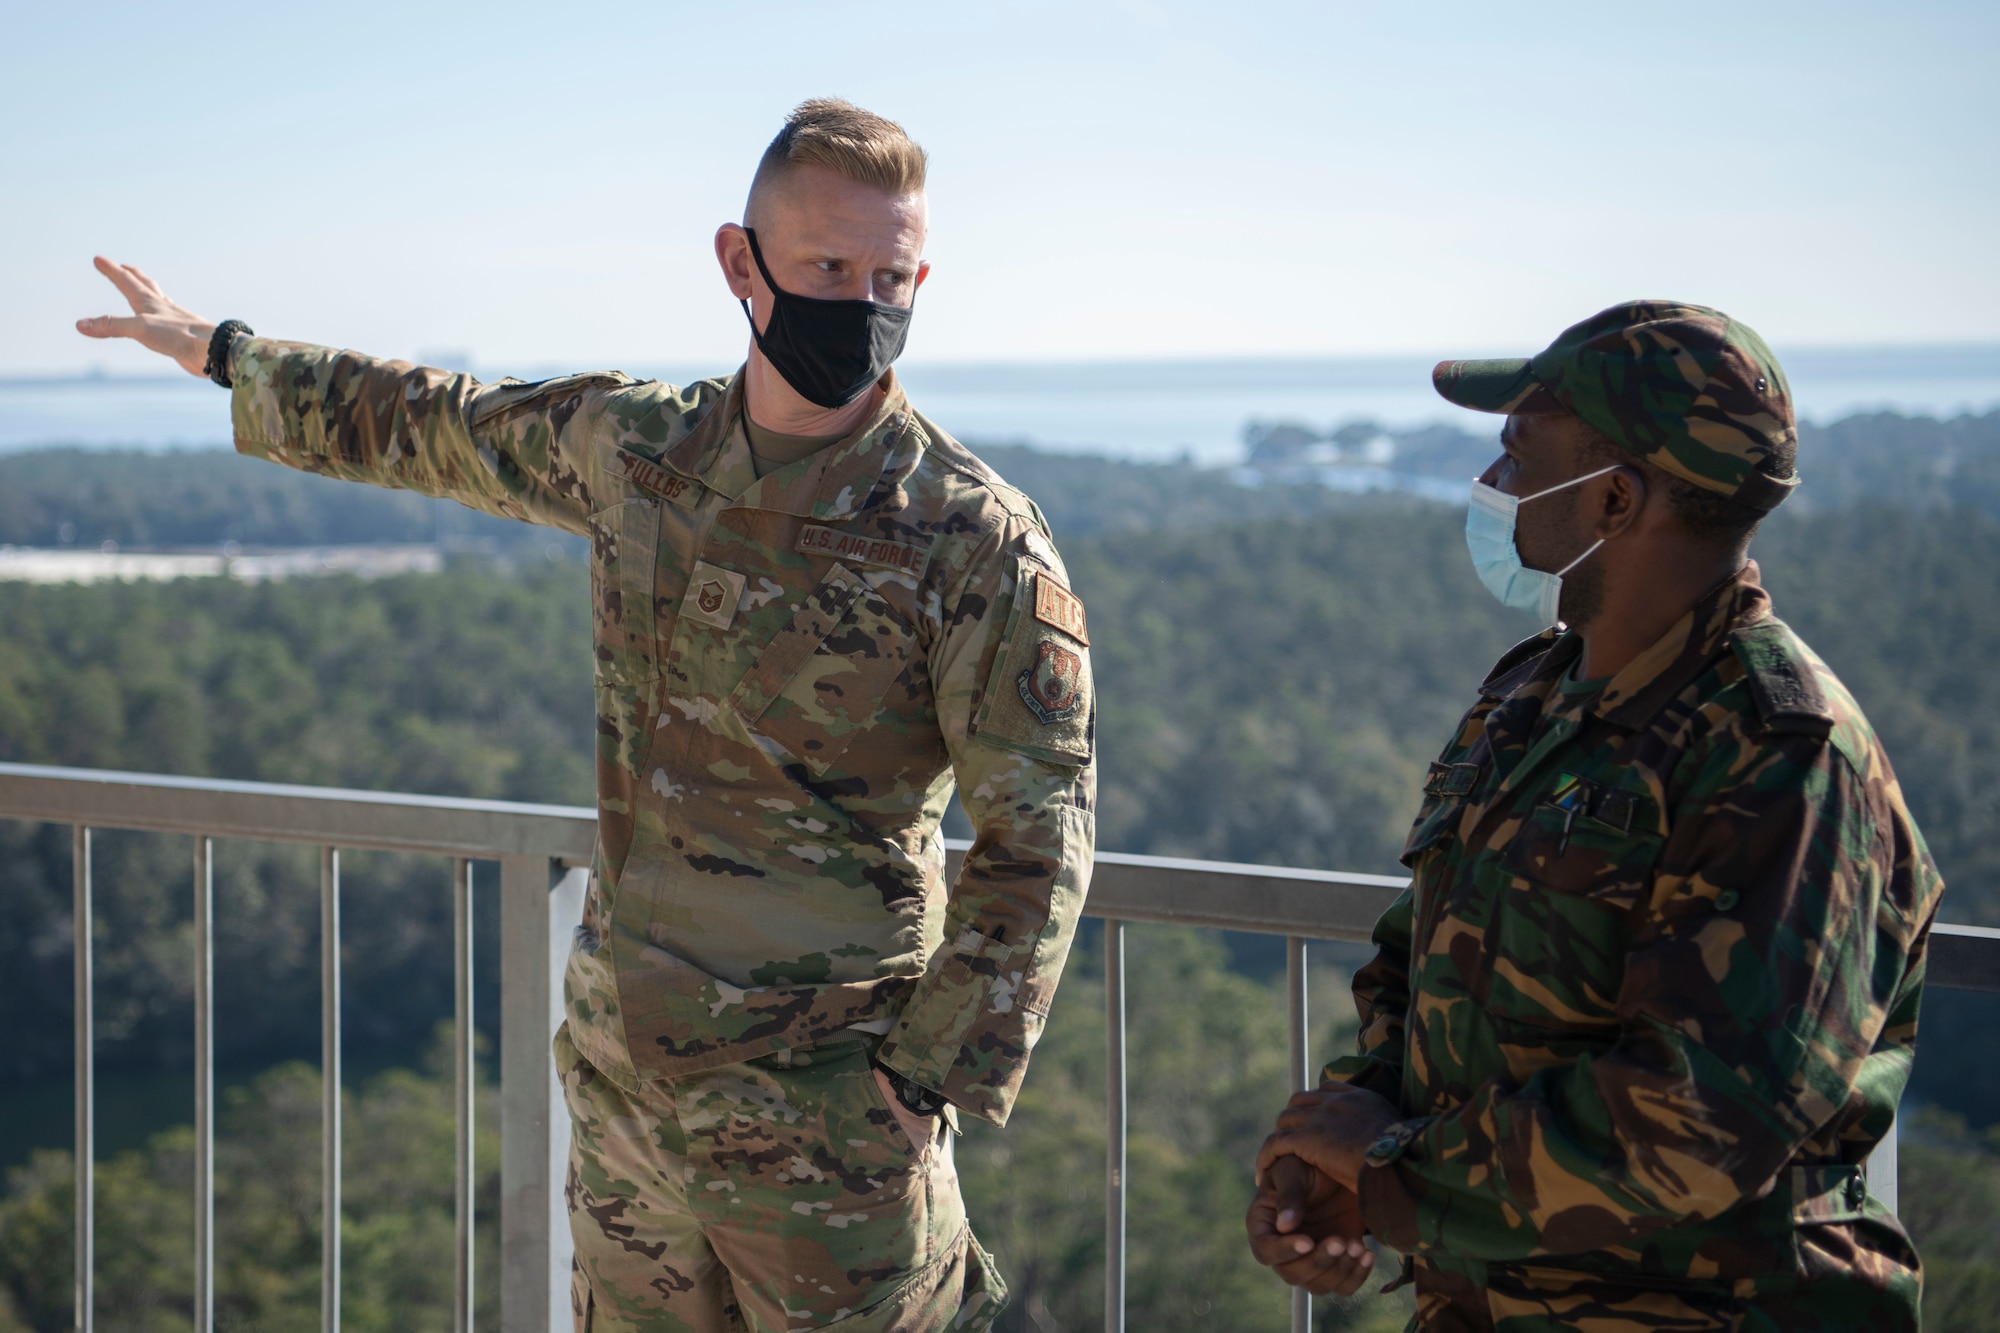 U.S. Air Force Master Sgt. John Tullos, a 96th Operations Support Squadron tower chief controller, interacts with a Building Partner Aviation Capacity Seminar 22A participant Jan. 27, 2022, at Eglin Air Force Base, Florida.